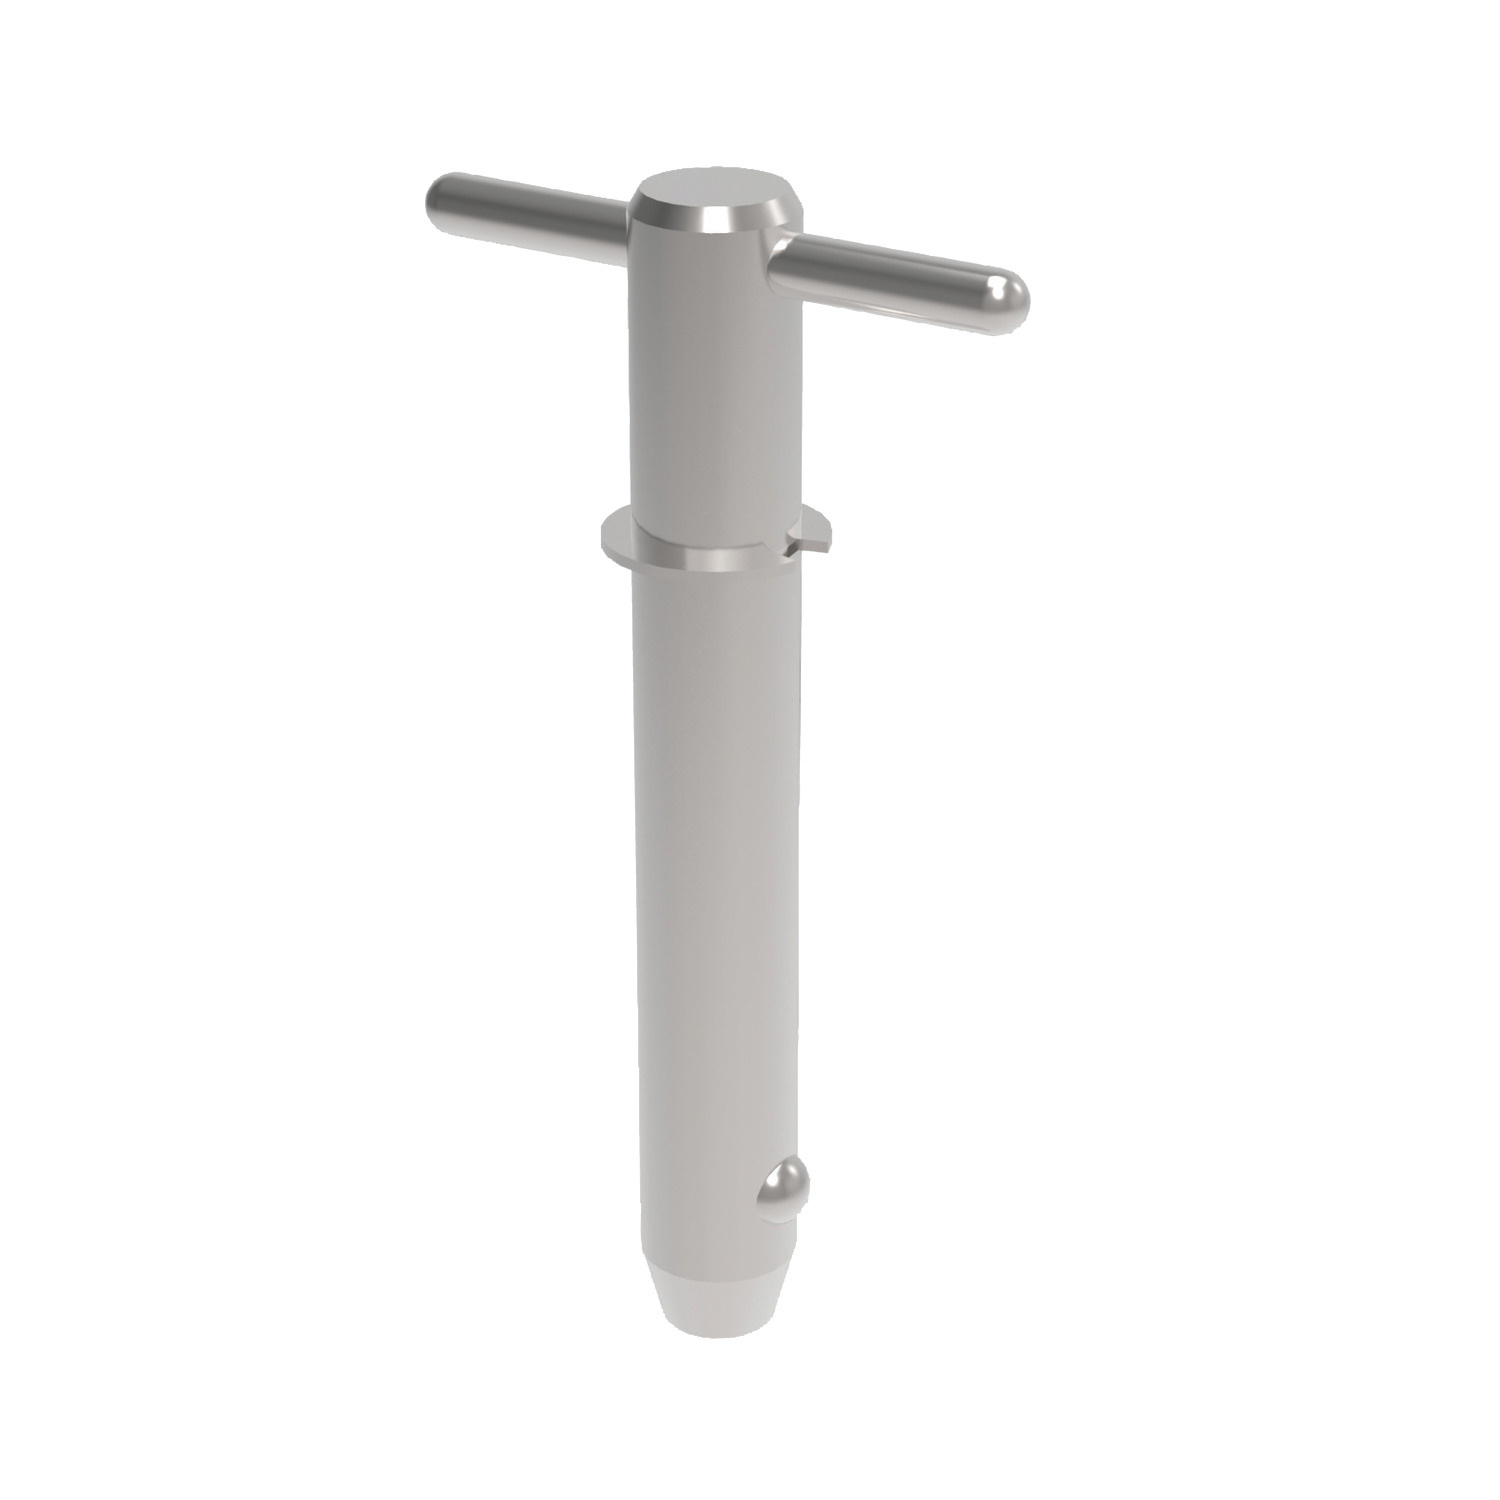 Product 33020, Detent Pin - T Handle - Shoulder stainless steel / 